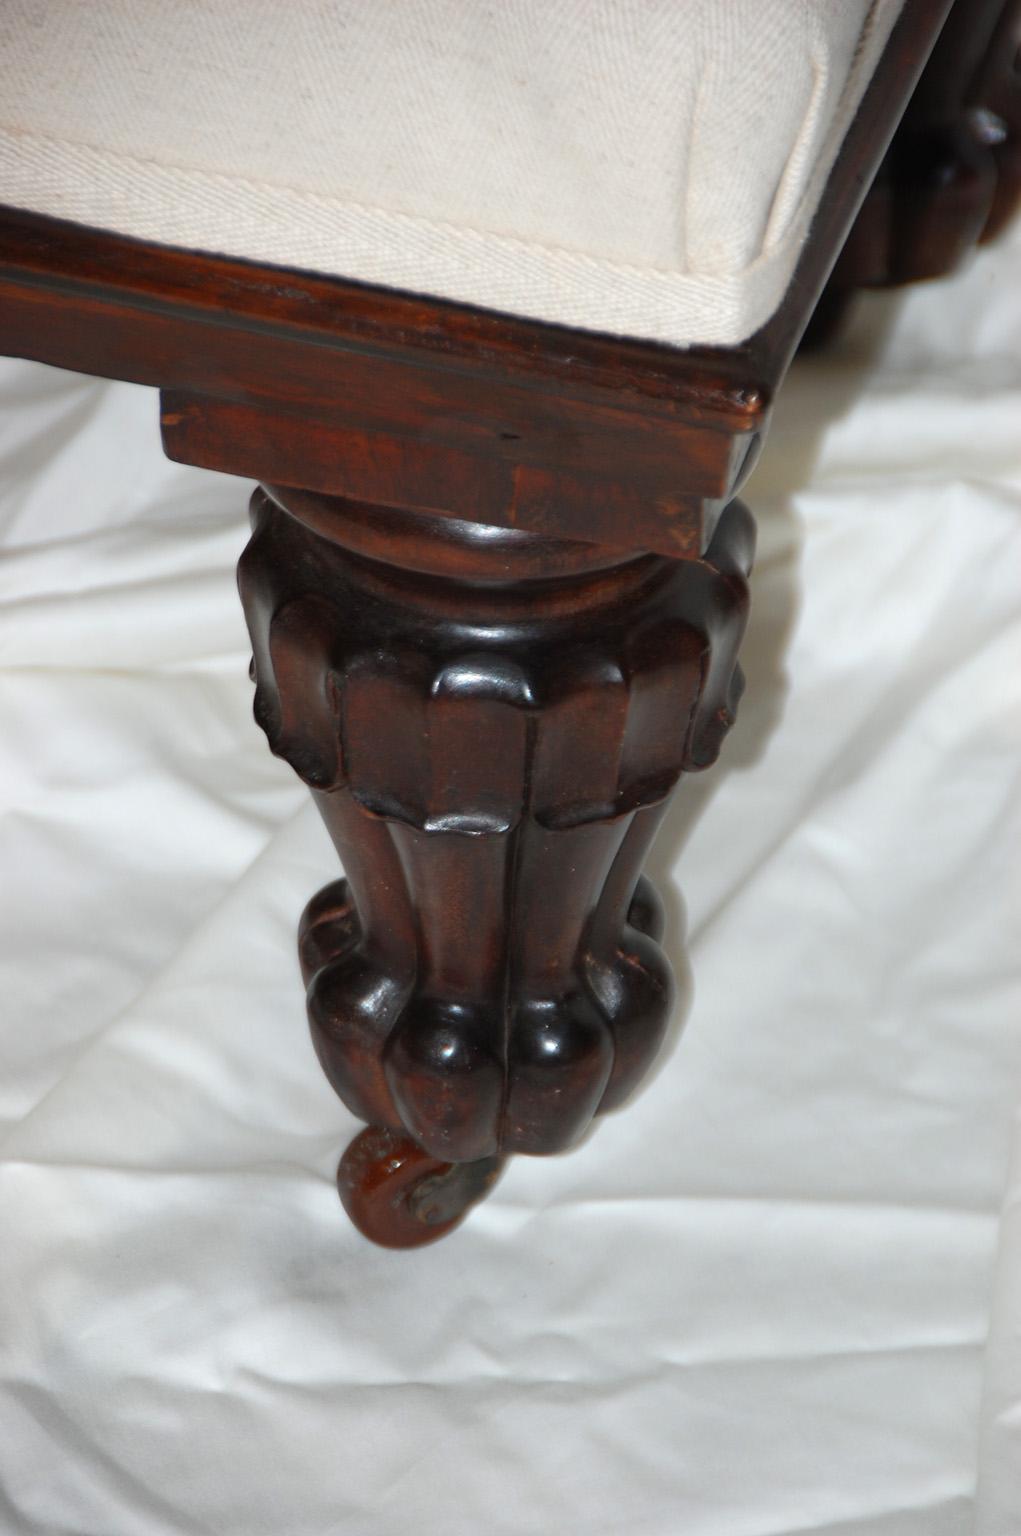 English carved rosewood ottoman by Lamb of Manchester. This large stool was made by Lamb of Manchester and has his name impressed into the frame (Lamb Manchester). Lamb was an internationally acclaimed maker of fine furniture; he employed some of